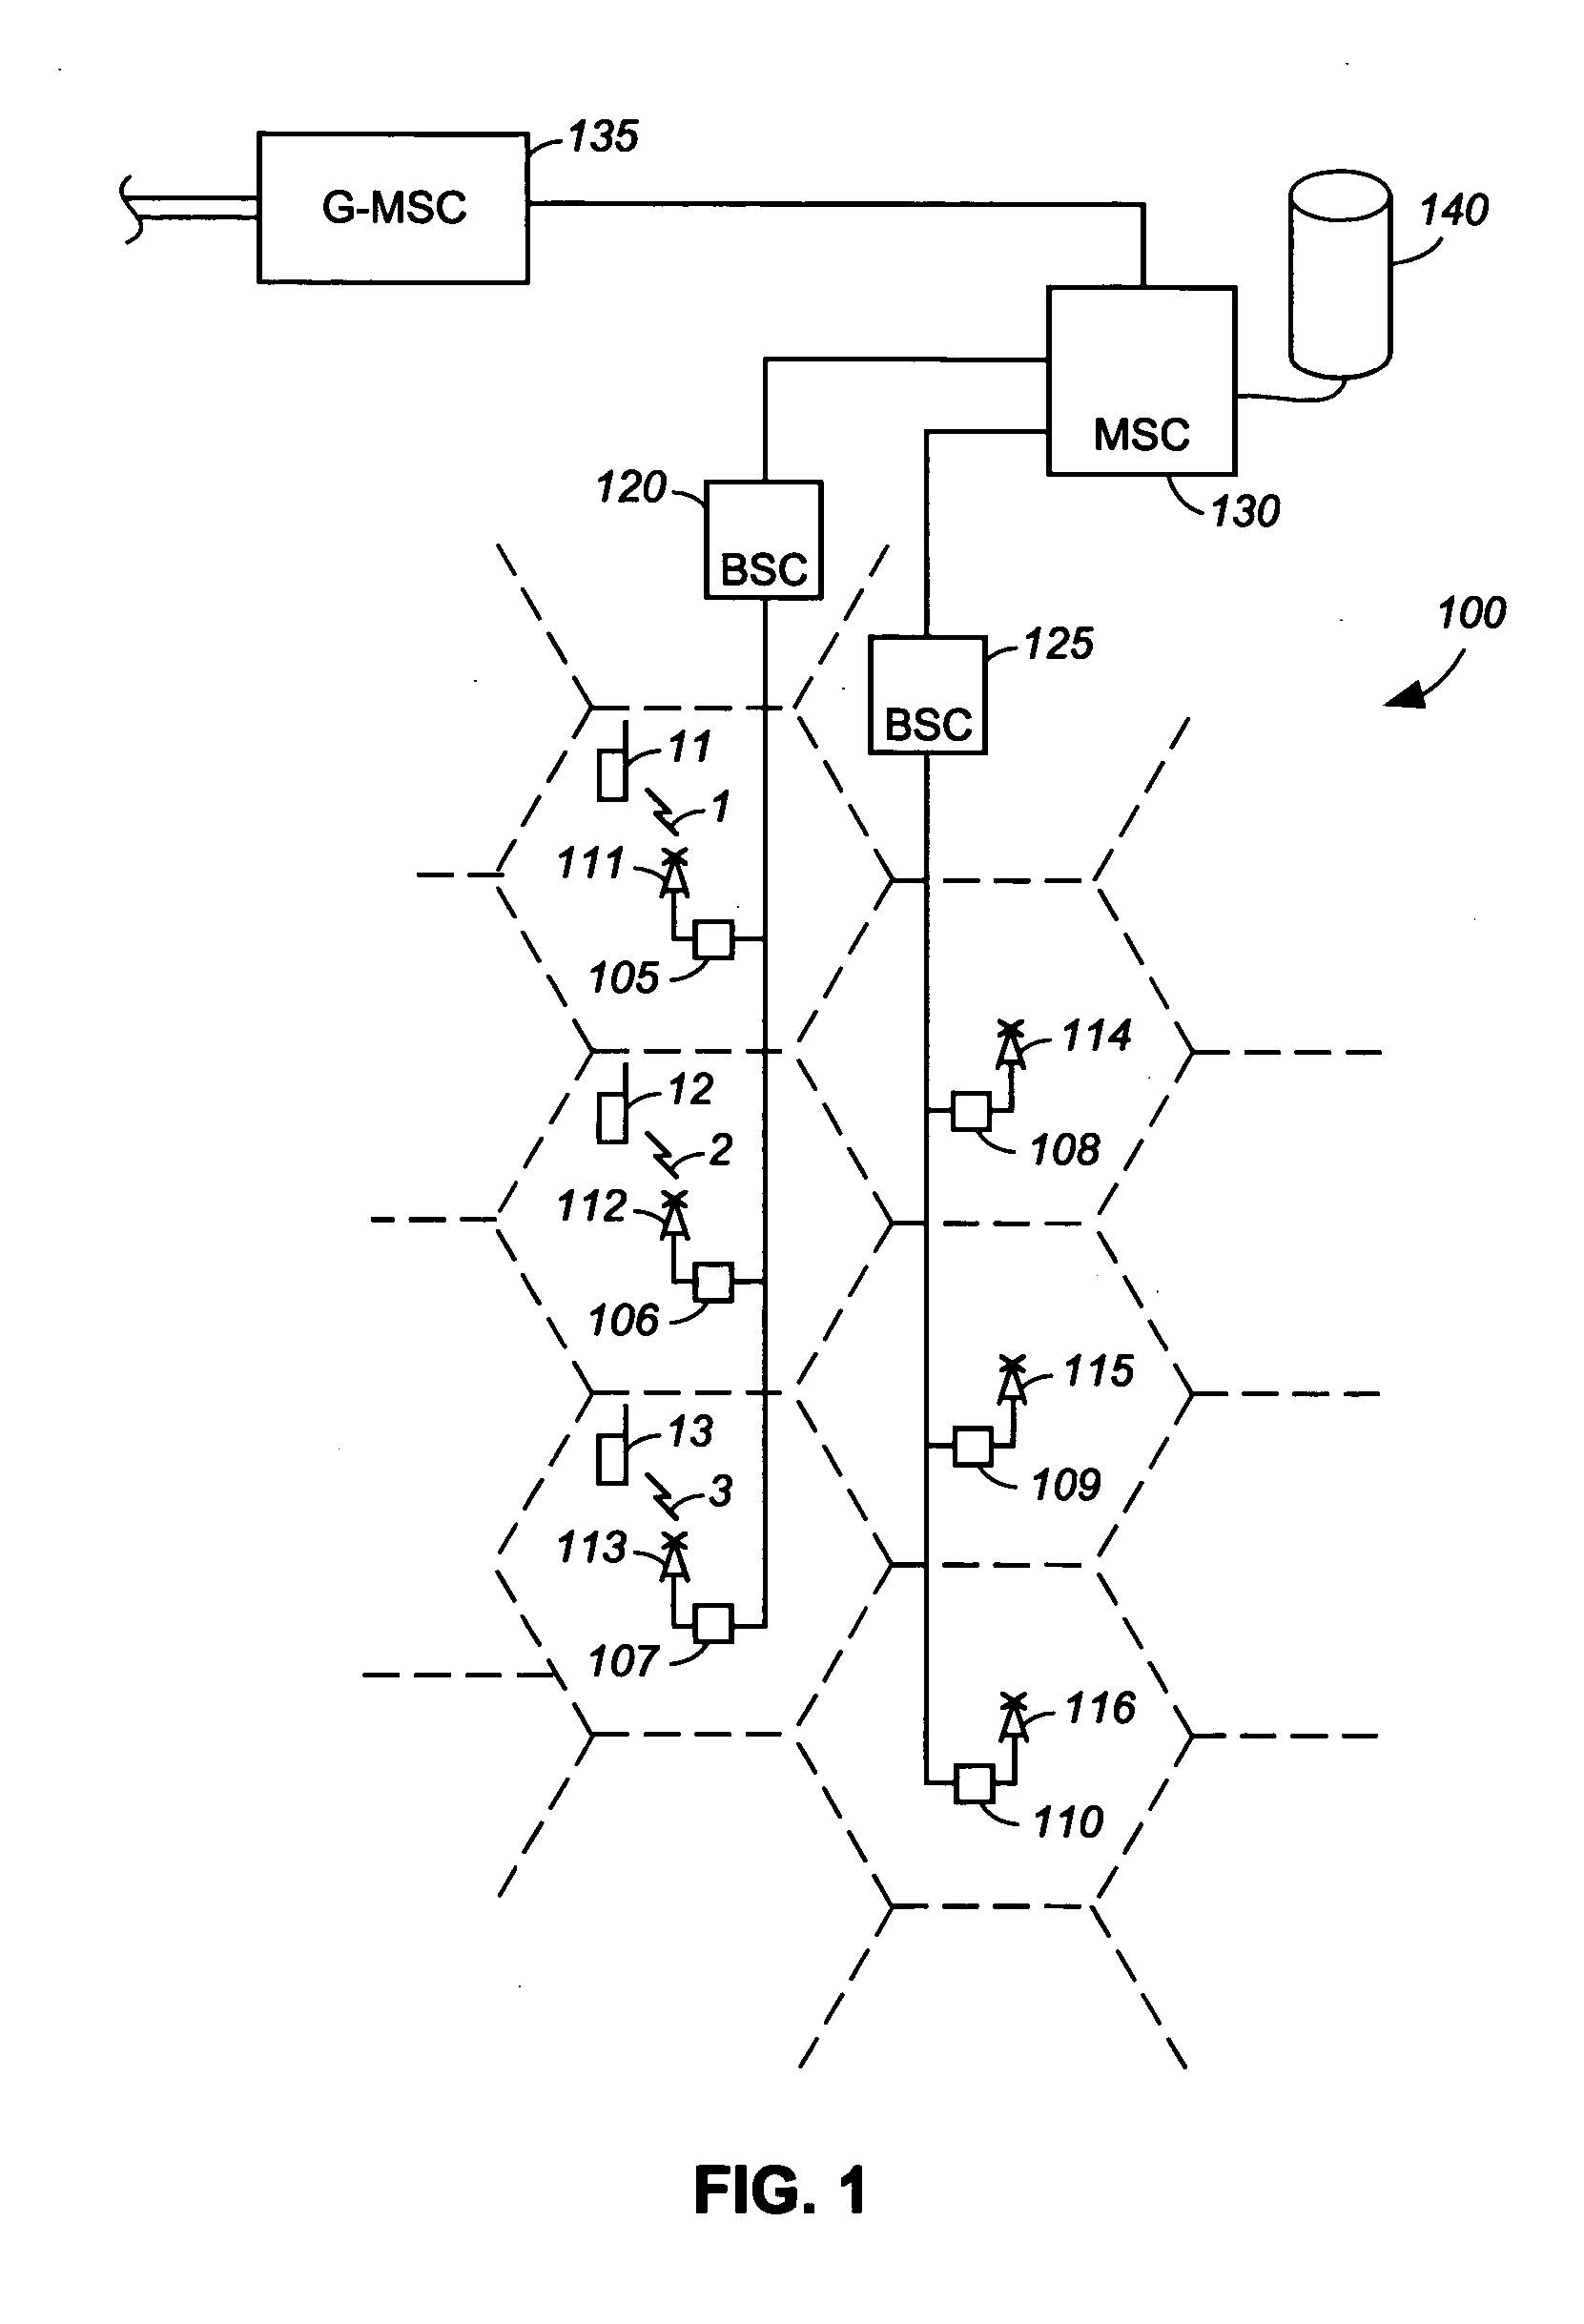 Apparatus and method for improved performance in MC-CDMA radio telecommunication systems that use pulse-shaping filters